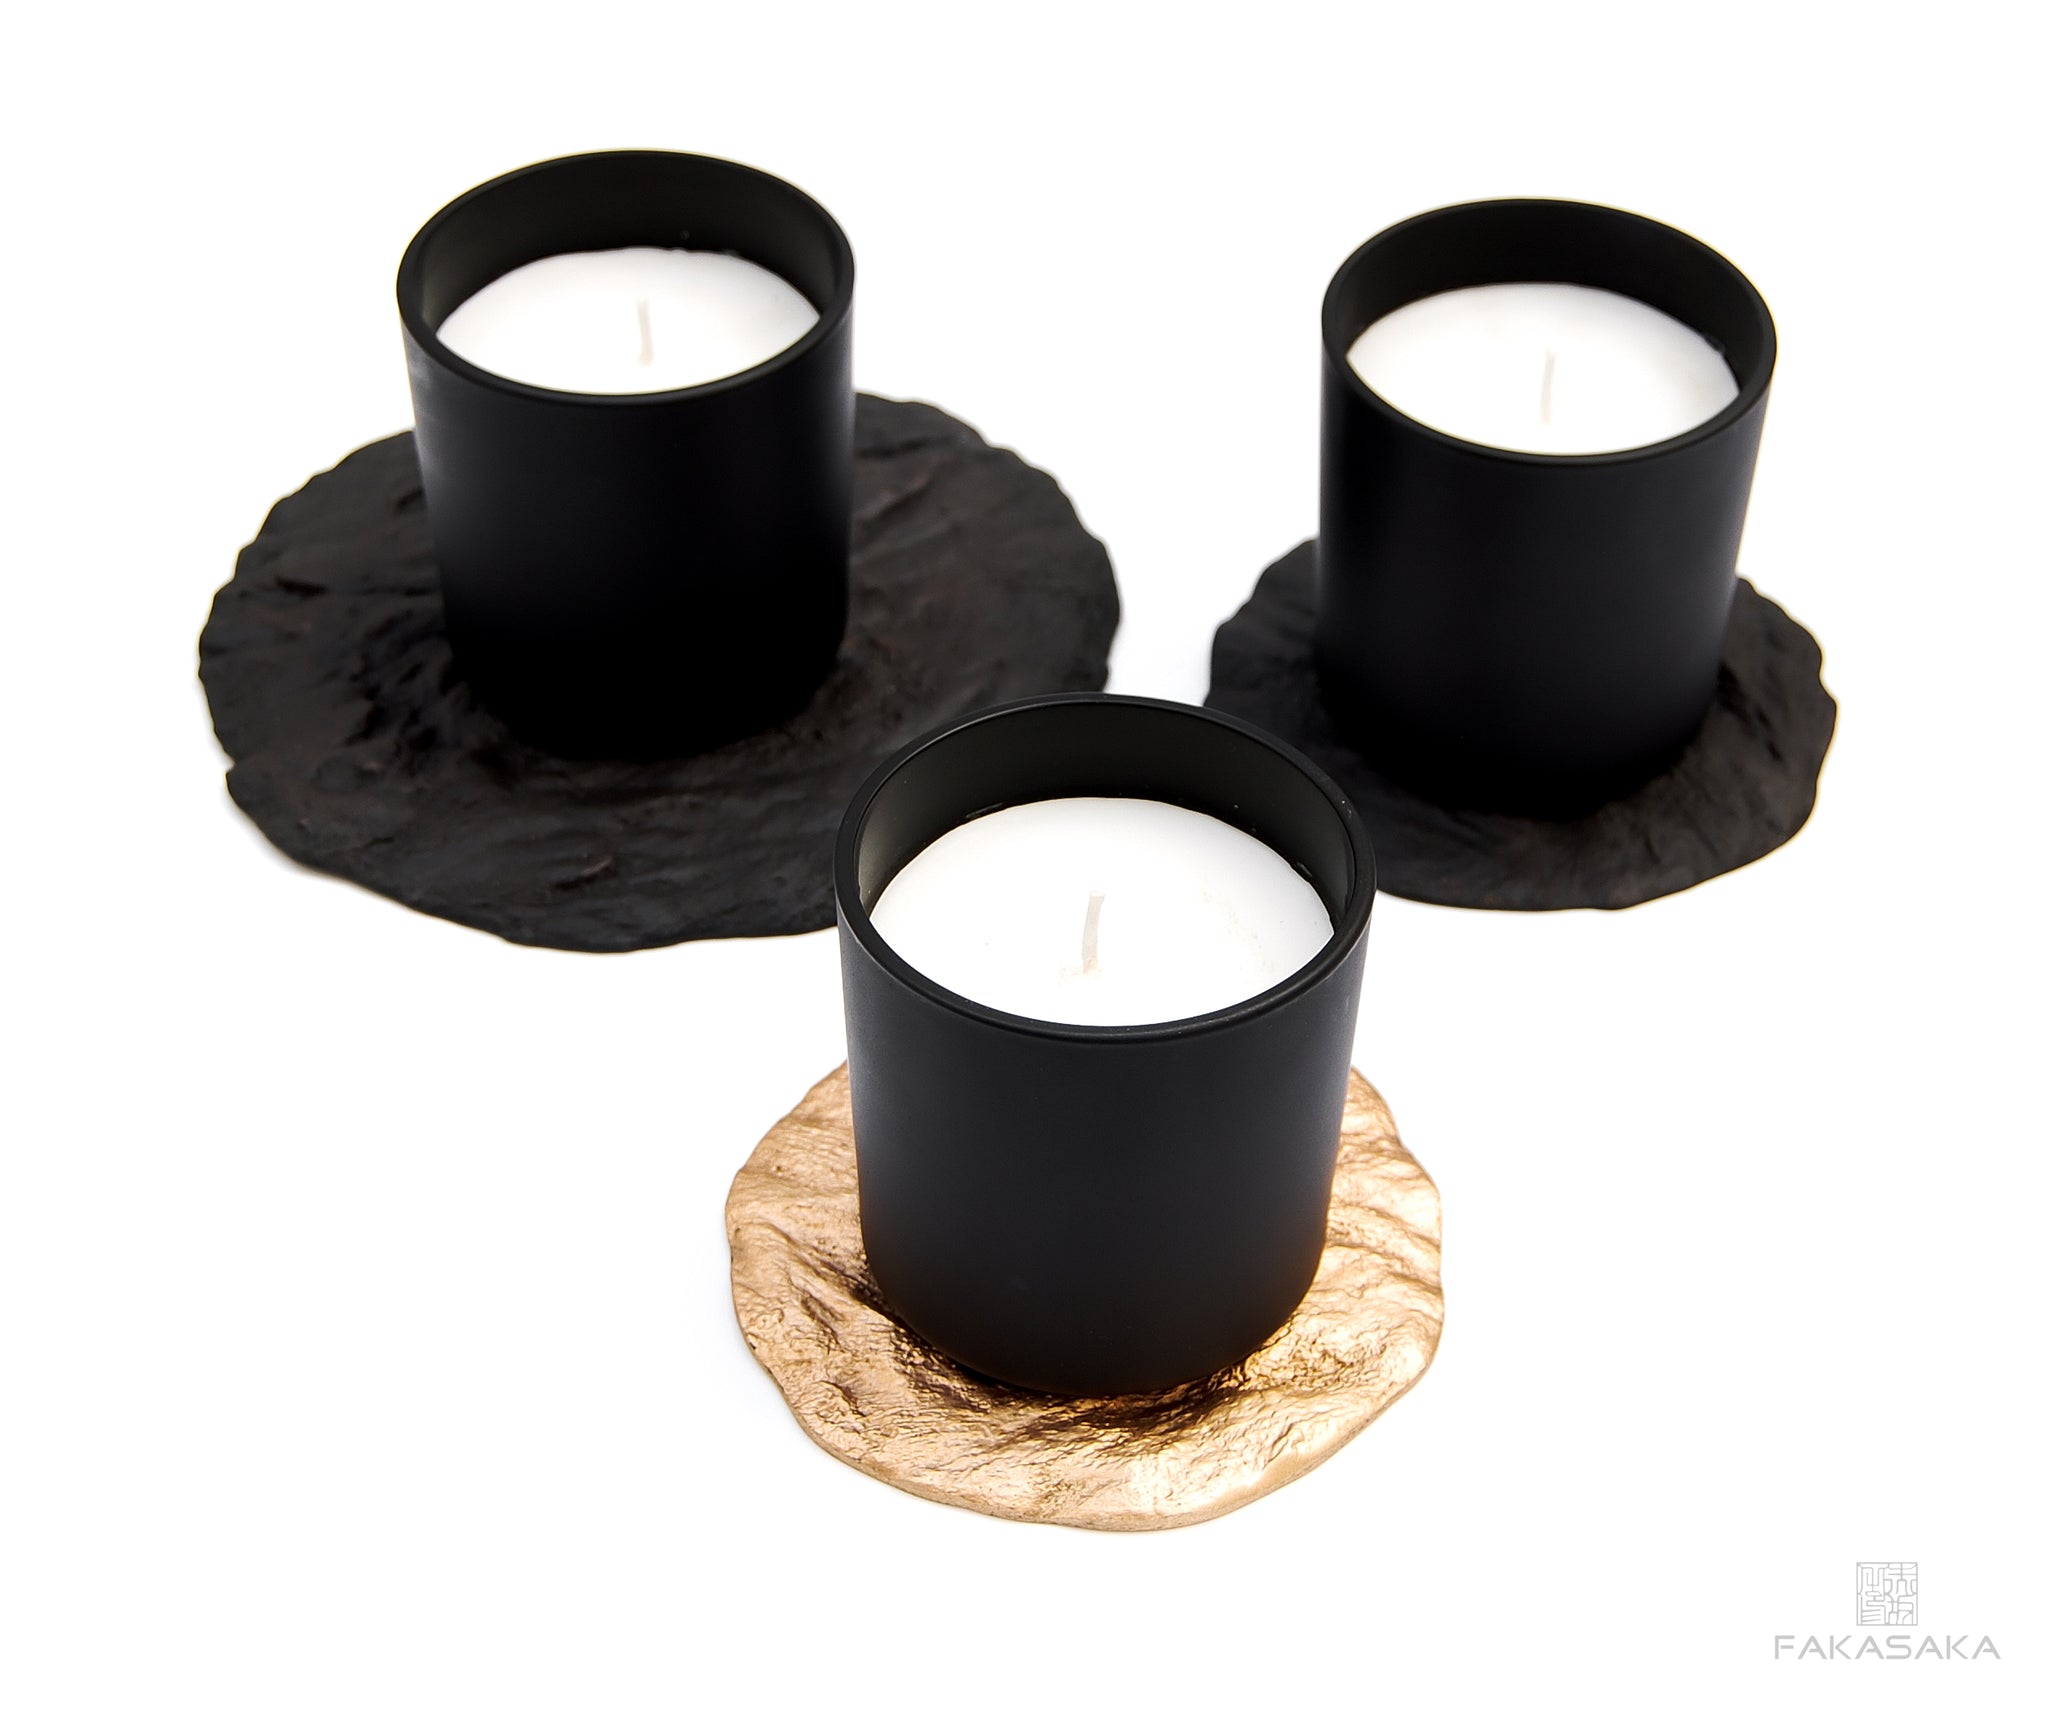 BRUTALIST COASTER 1<br><br>CUP COASTER  / BOTTLE COASTER  / CANDLE TRAY / SMALL TRAY<br><br>DARK BRONZE